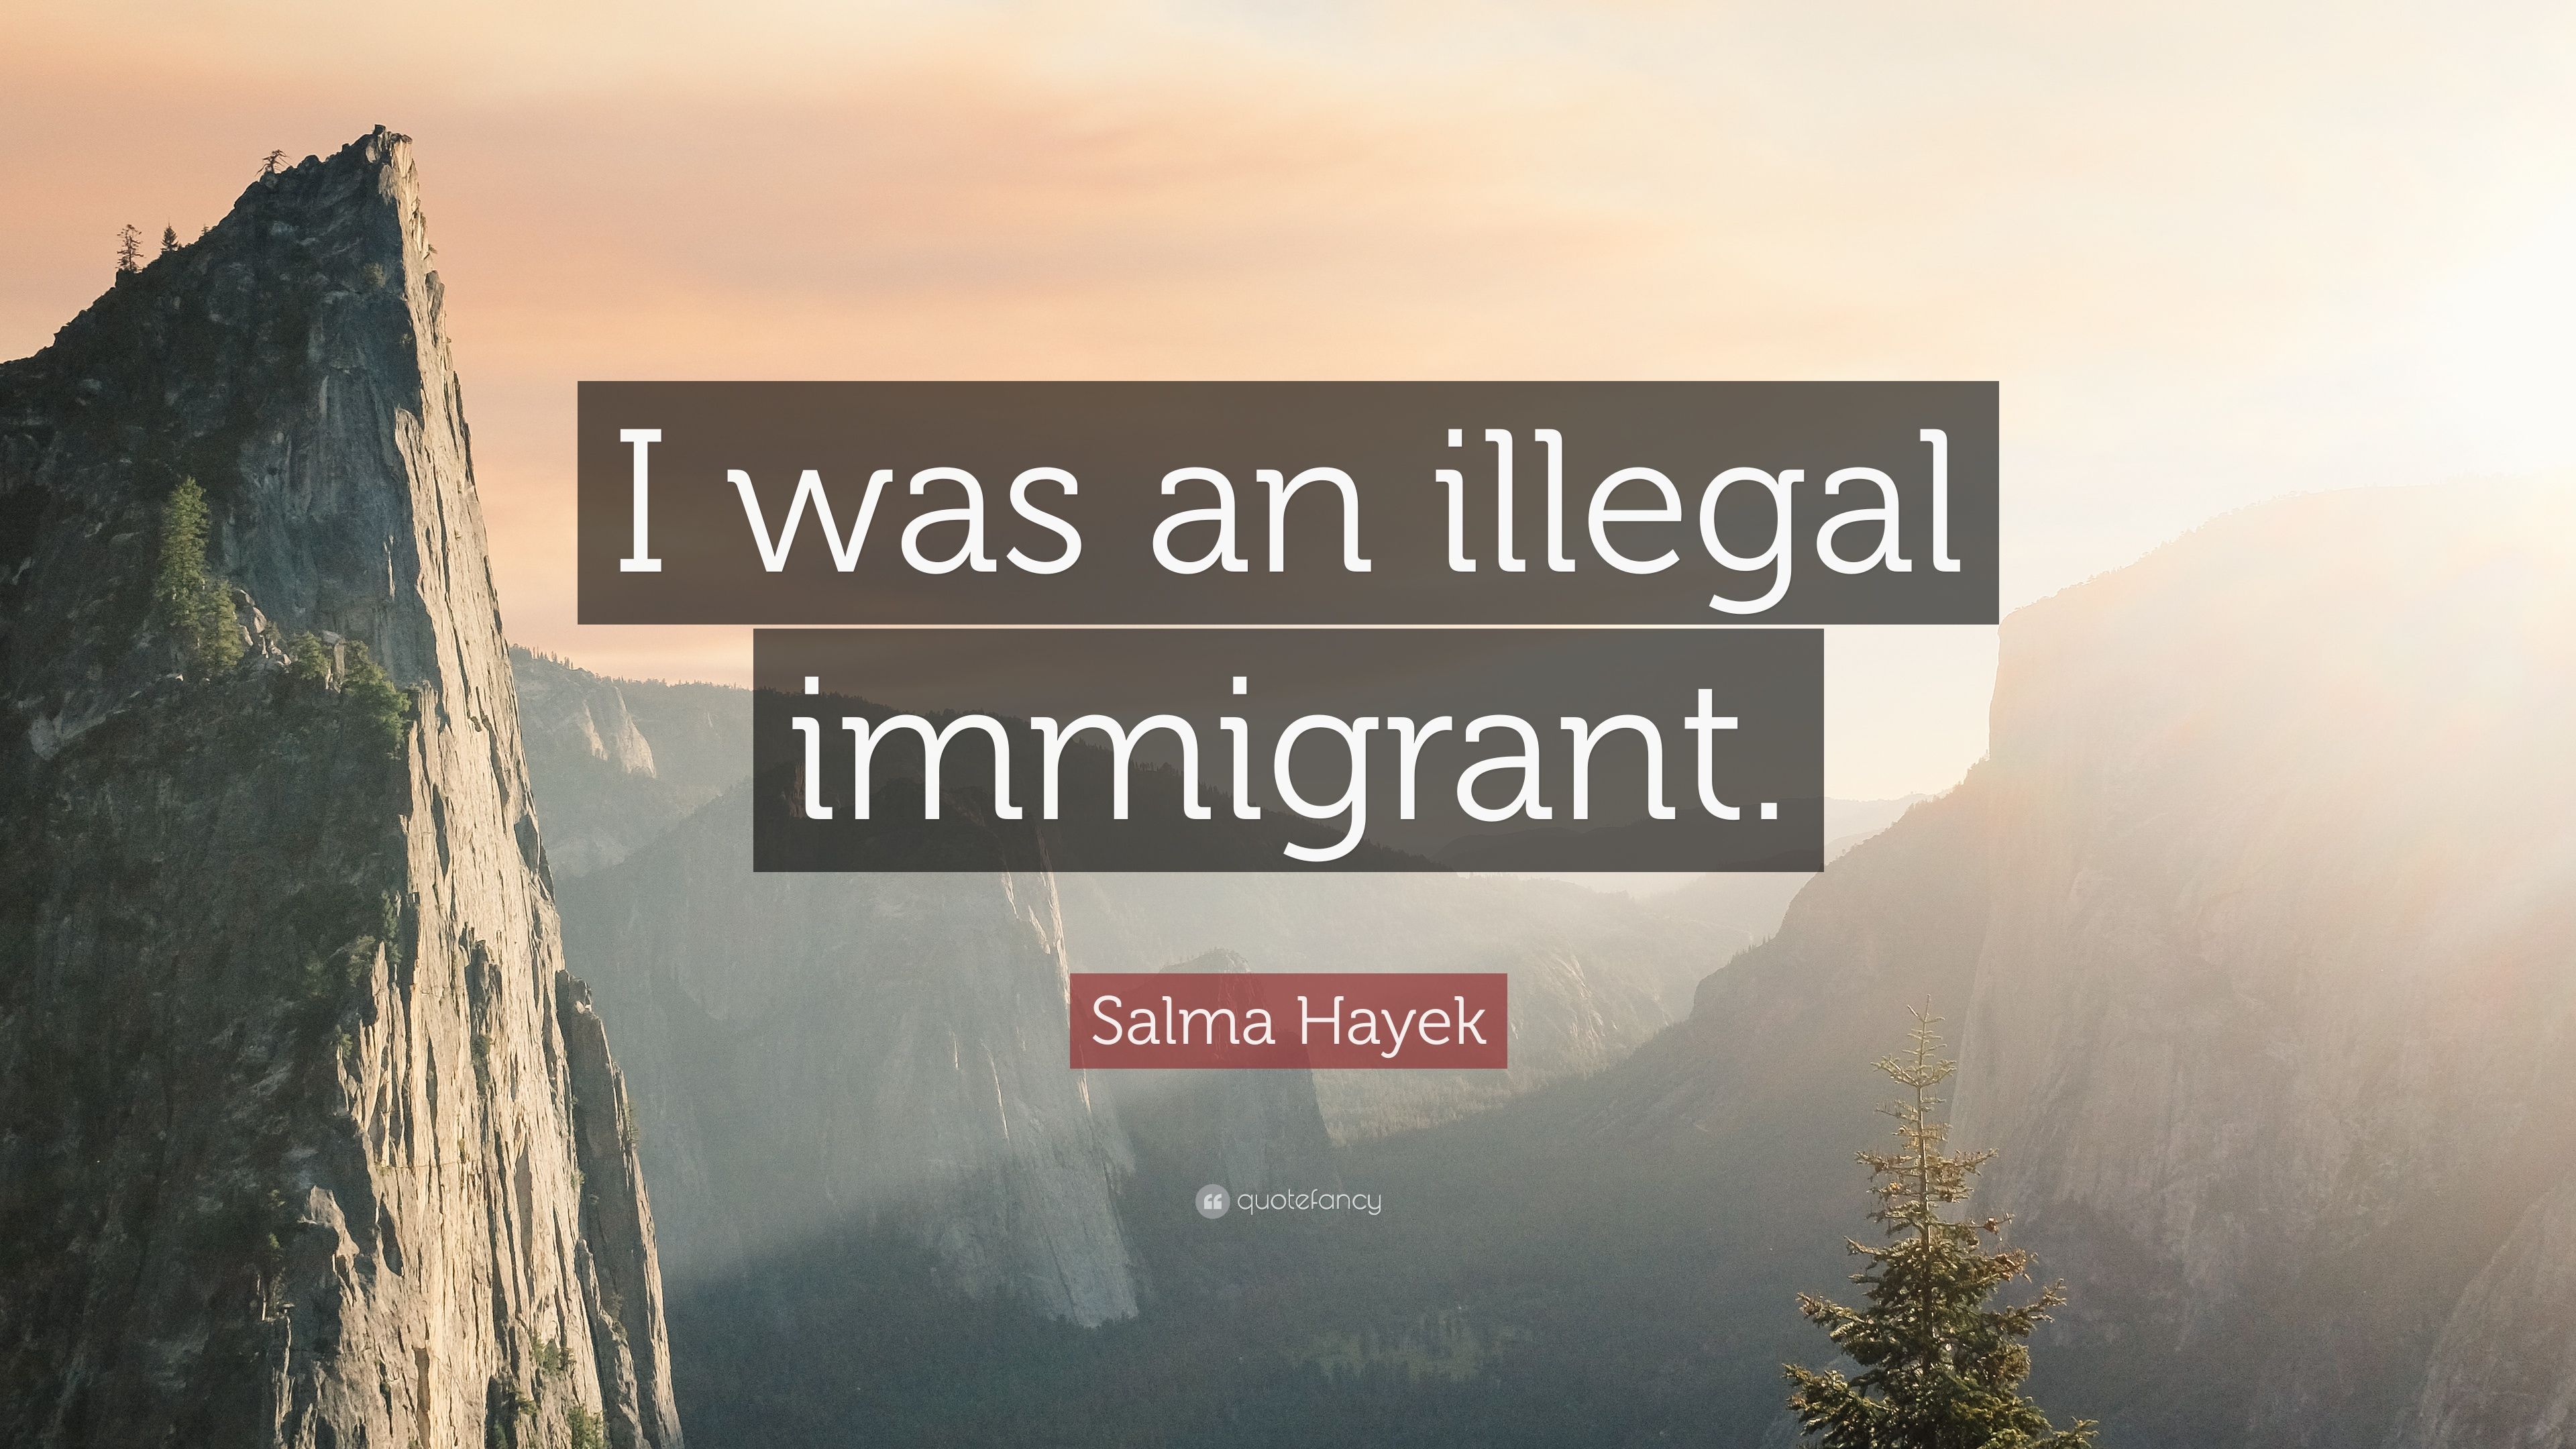 Salma Hayek Quote: “I was an illegal immigrant.” (7 wallpaper)